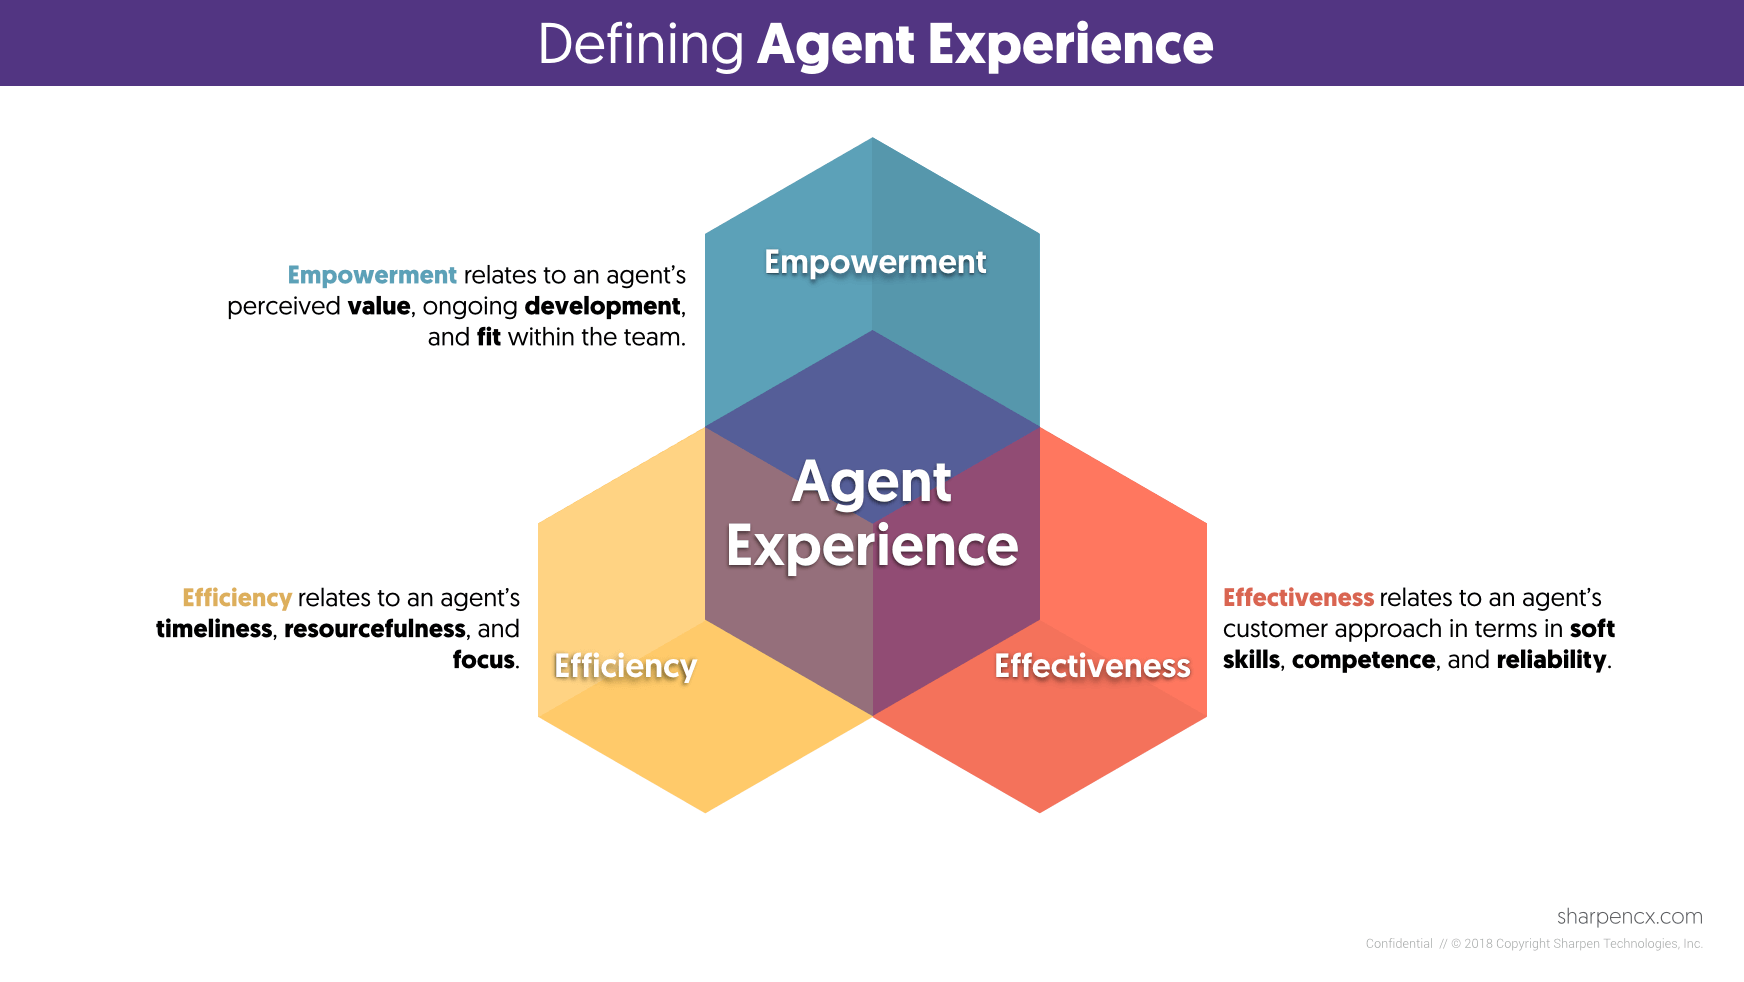 Defining Agent Experience